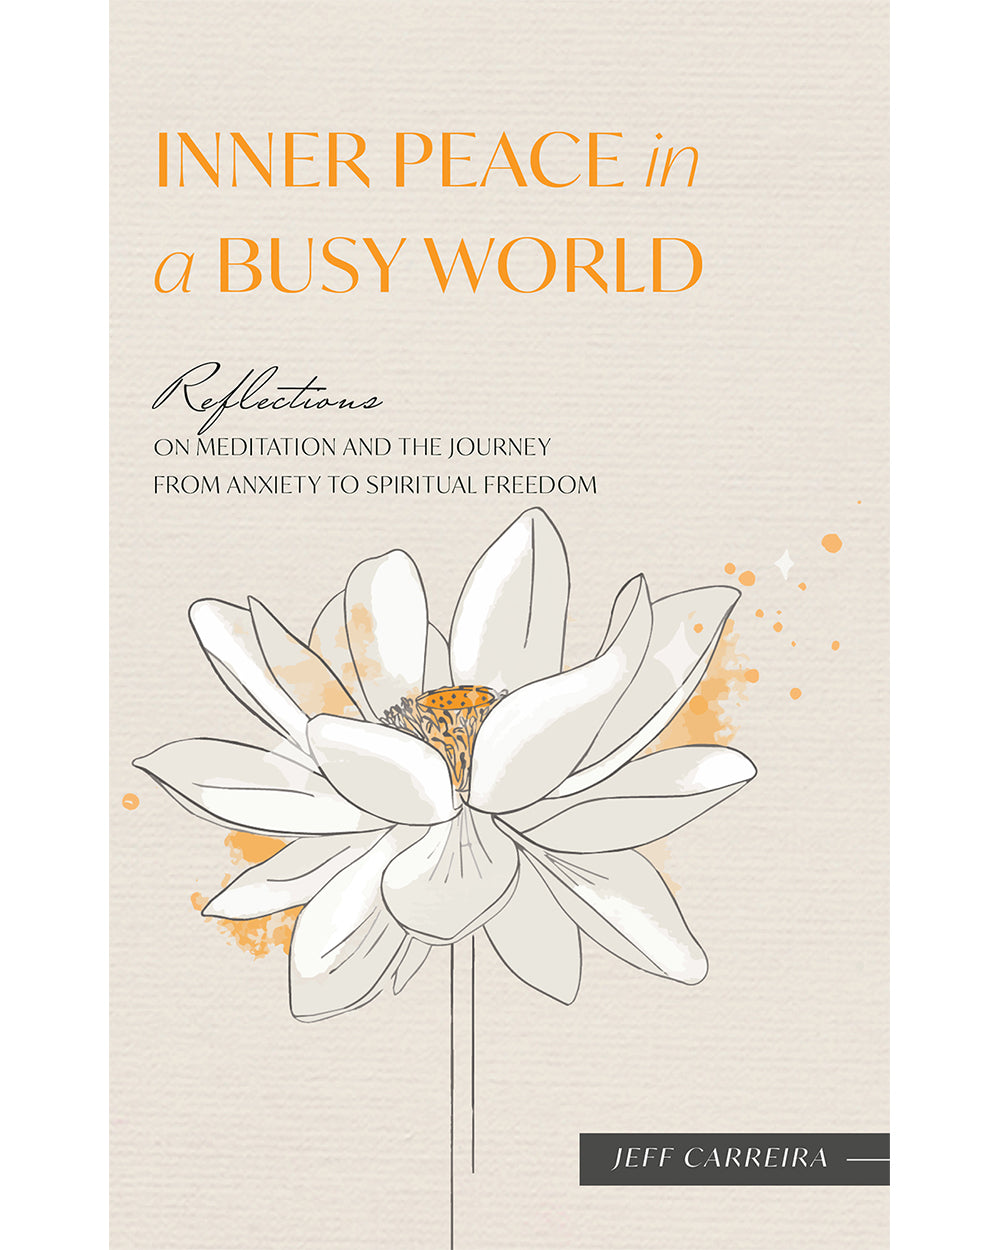 Inner Peace in a Busy World: Reflections on Meditation and the Journey from Anxiety to Spiritual Freedom